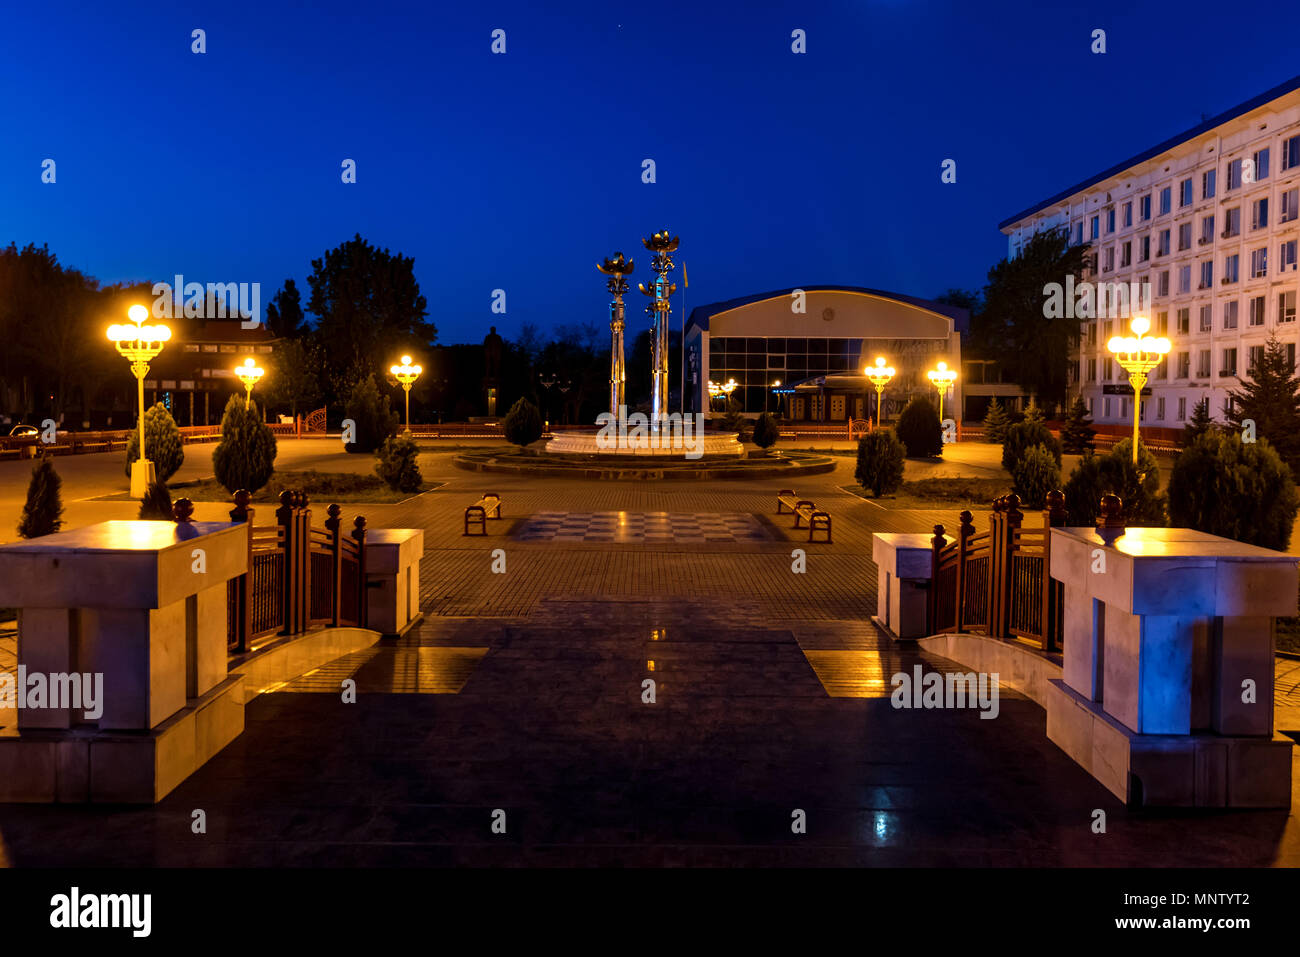 Pagoda of Seven Days in Elista, Russia at night Stock Photo